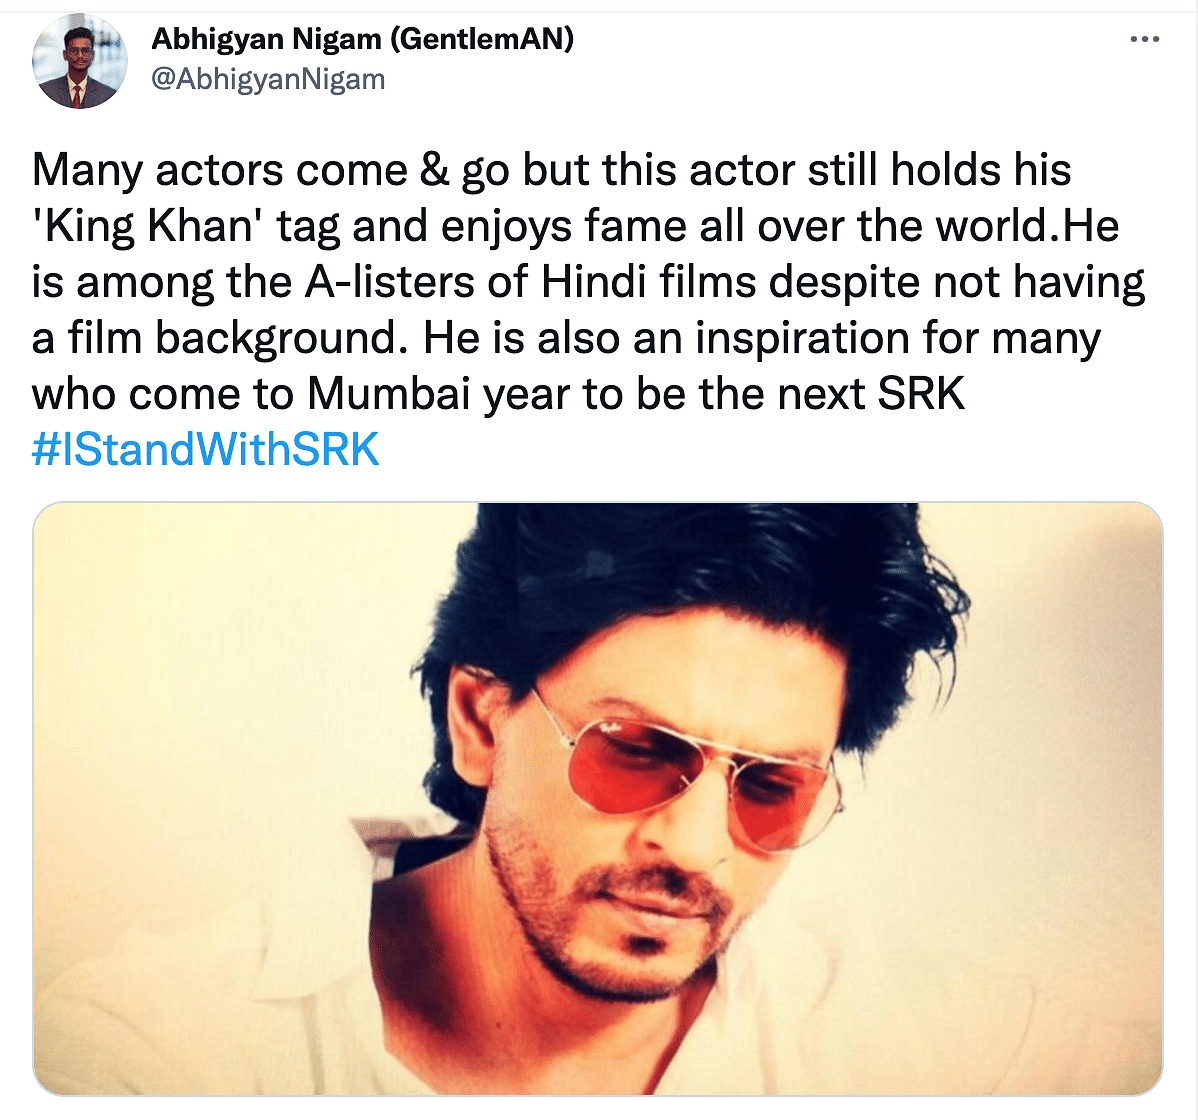 Here's how fans and other netizens have supported Shah Rukh Khan on Twitter.